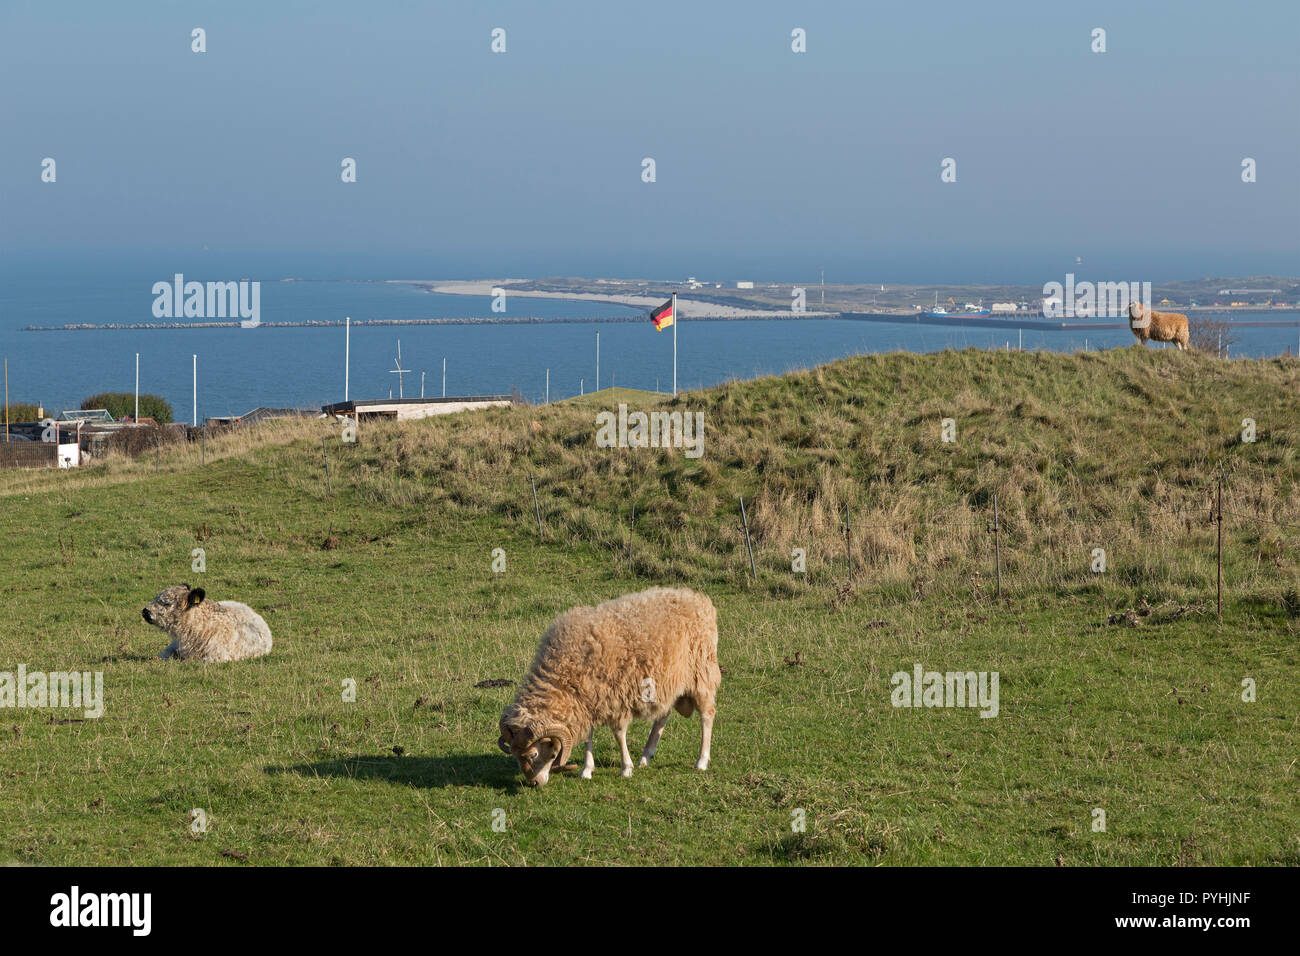 cattle grazing on Oberland (upper land), in the background the Duene (dune), Heligoland, Schleswig-Holstein, Germany Stock Photo